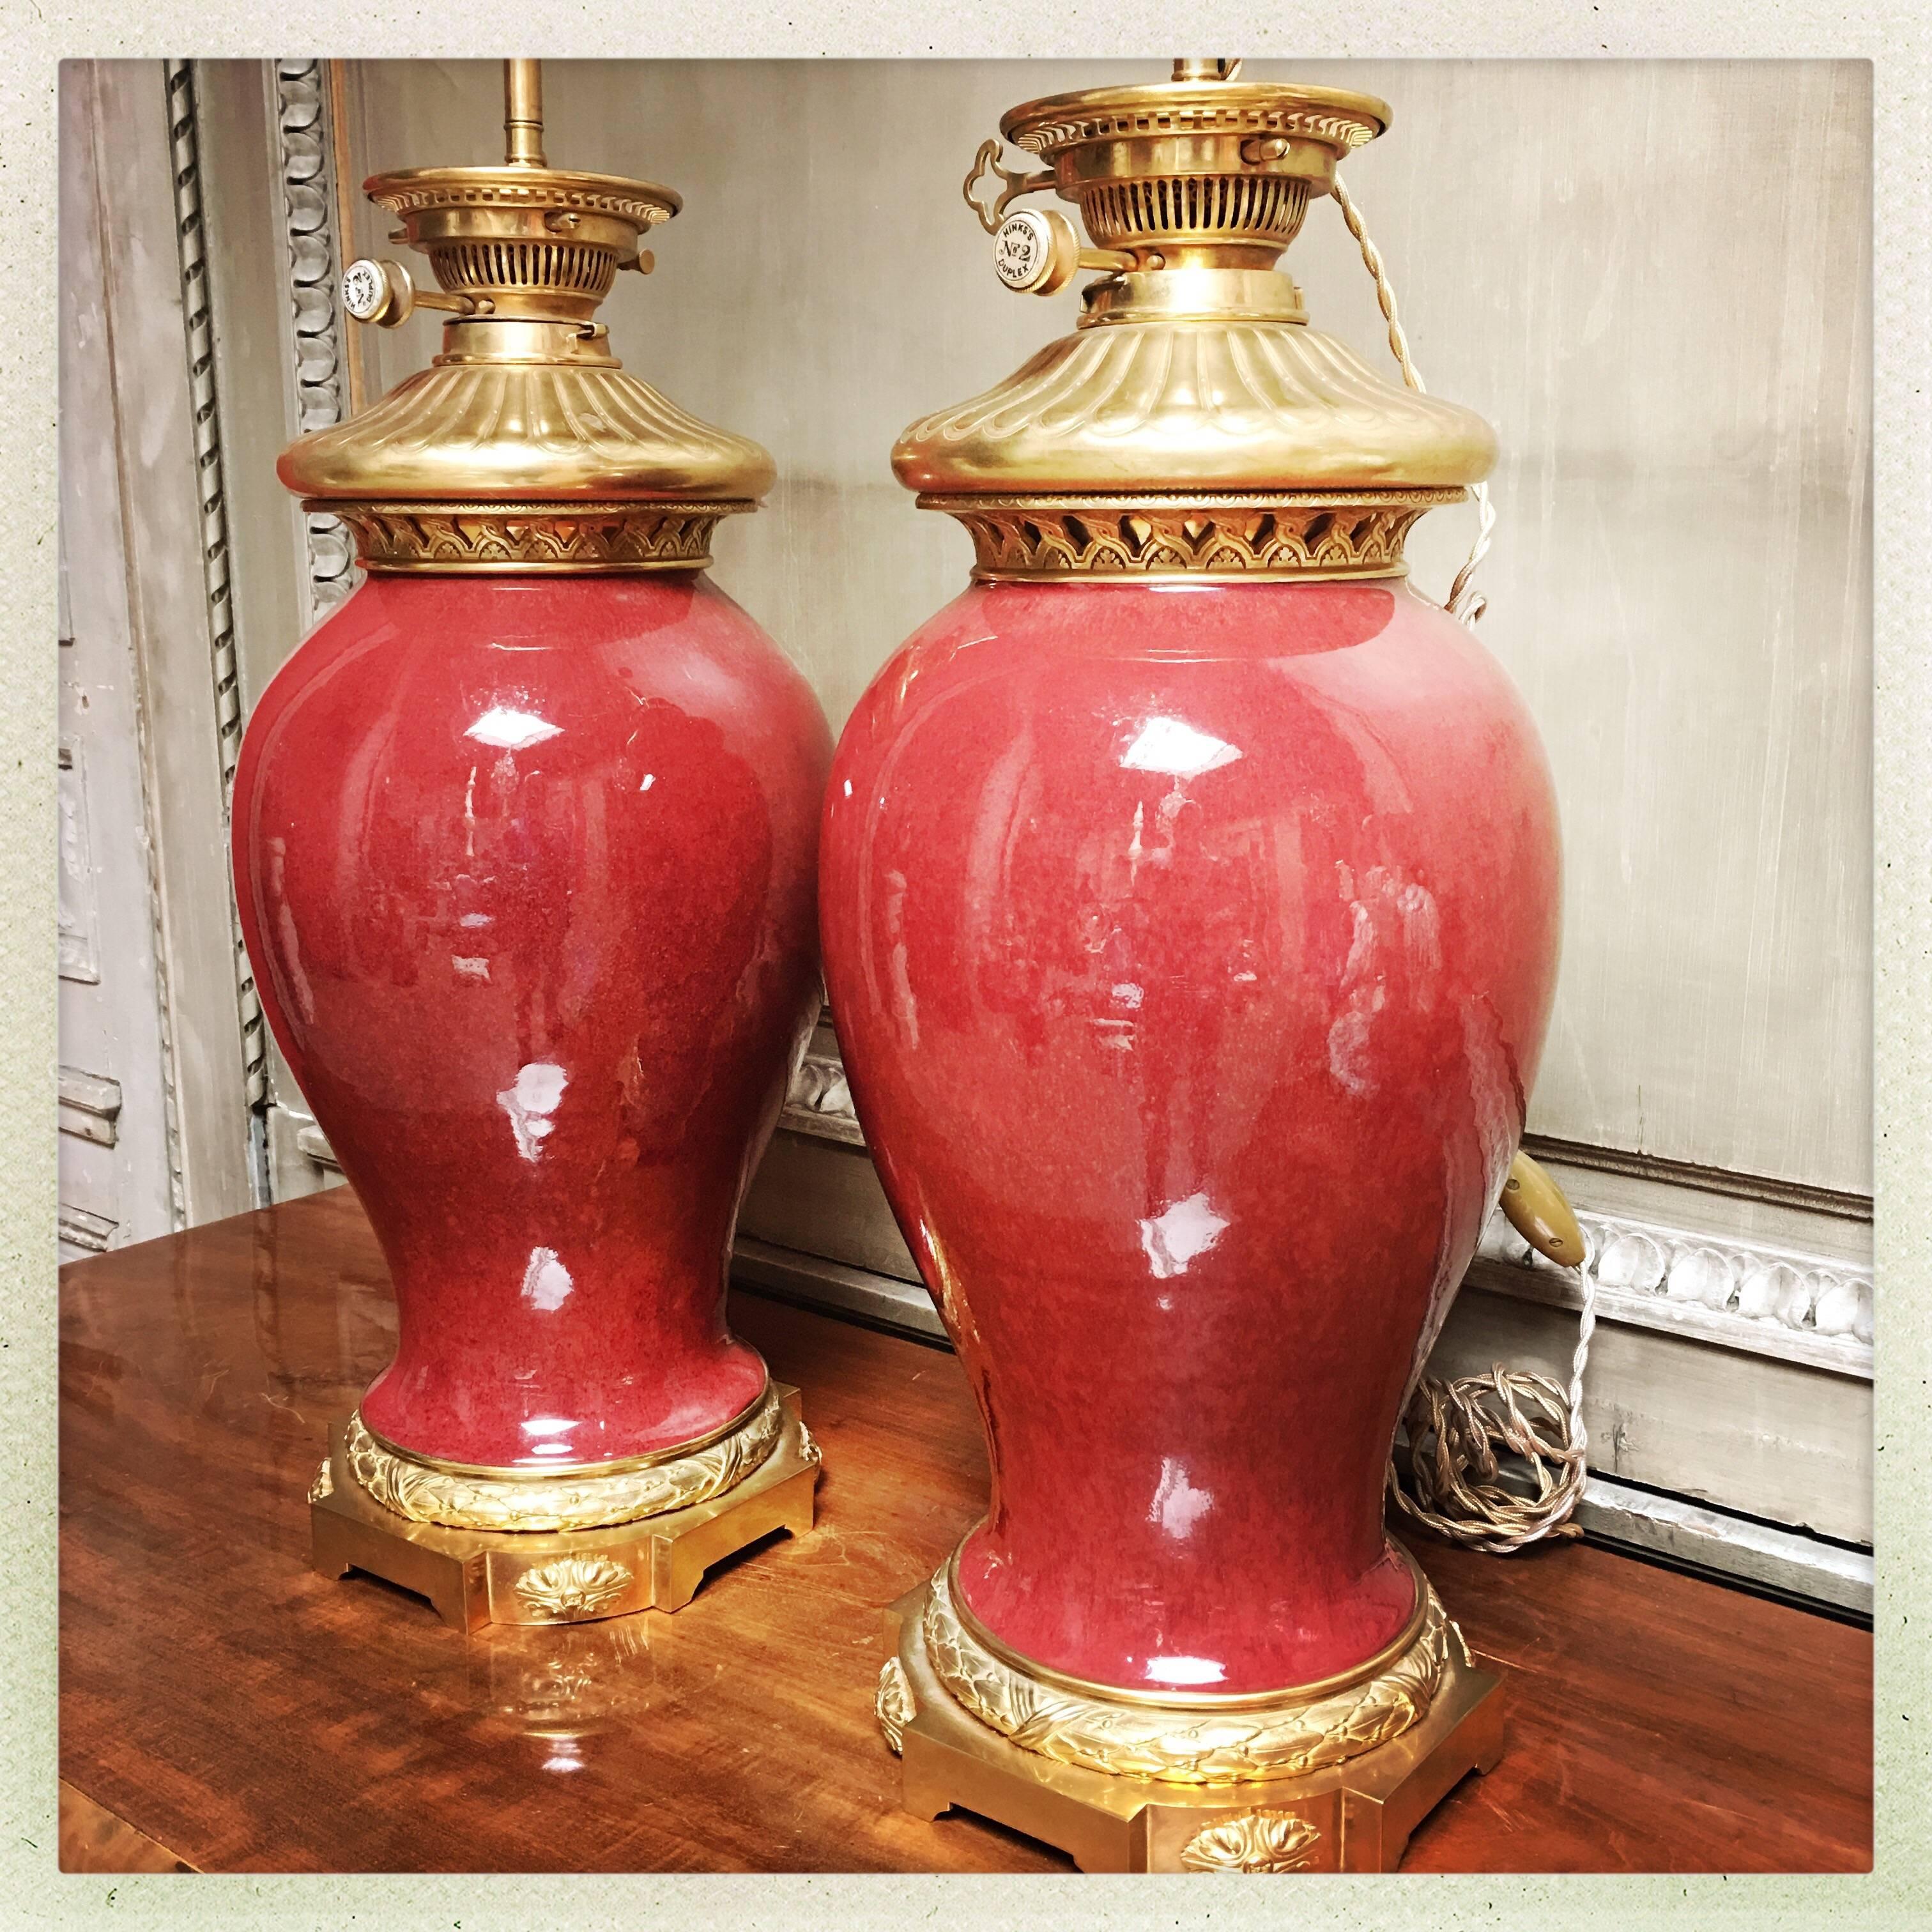 A large pair of Chinese Sang de boeuf (oxblood) porcelain lamp bases with French Louis XVI style bronze dore mountings.